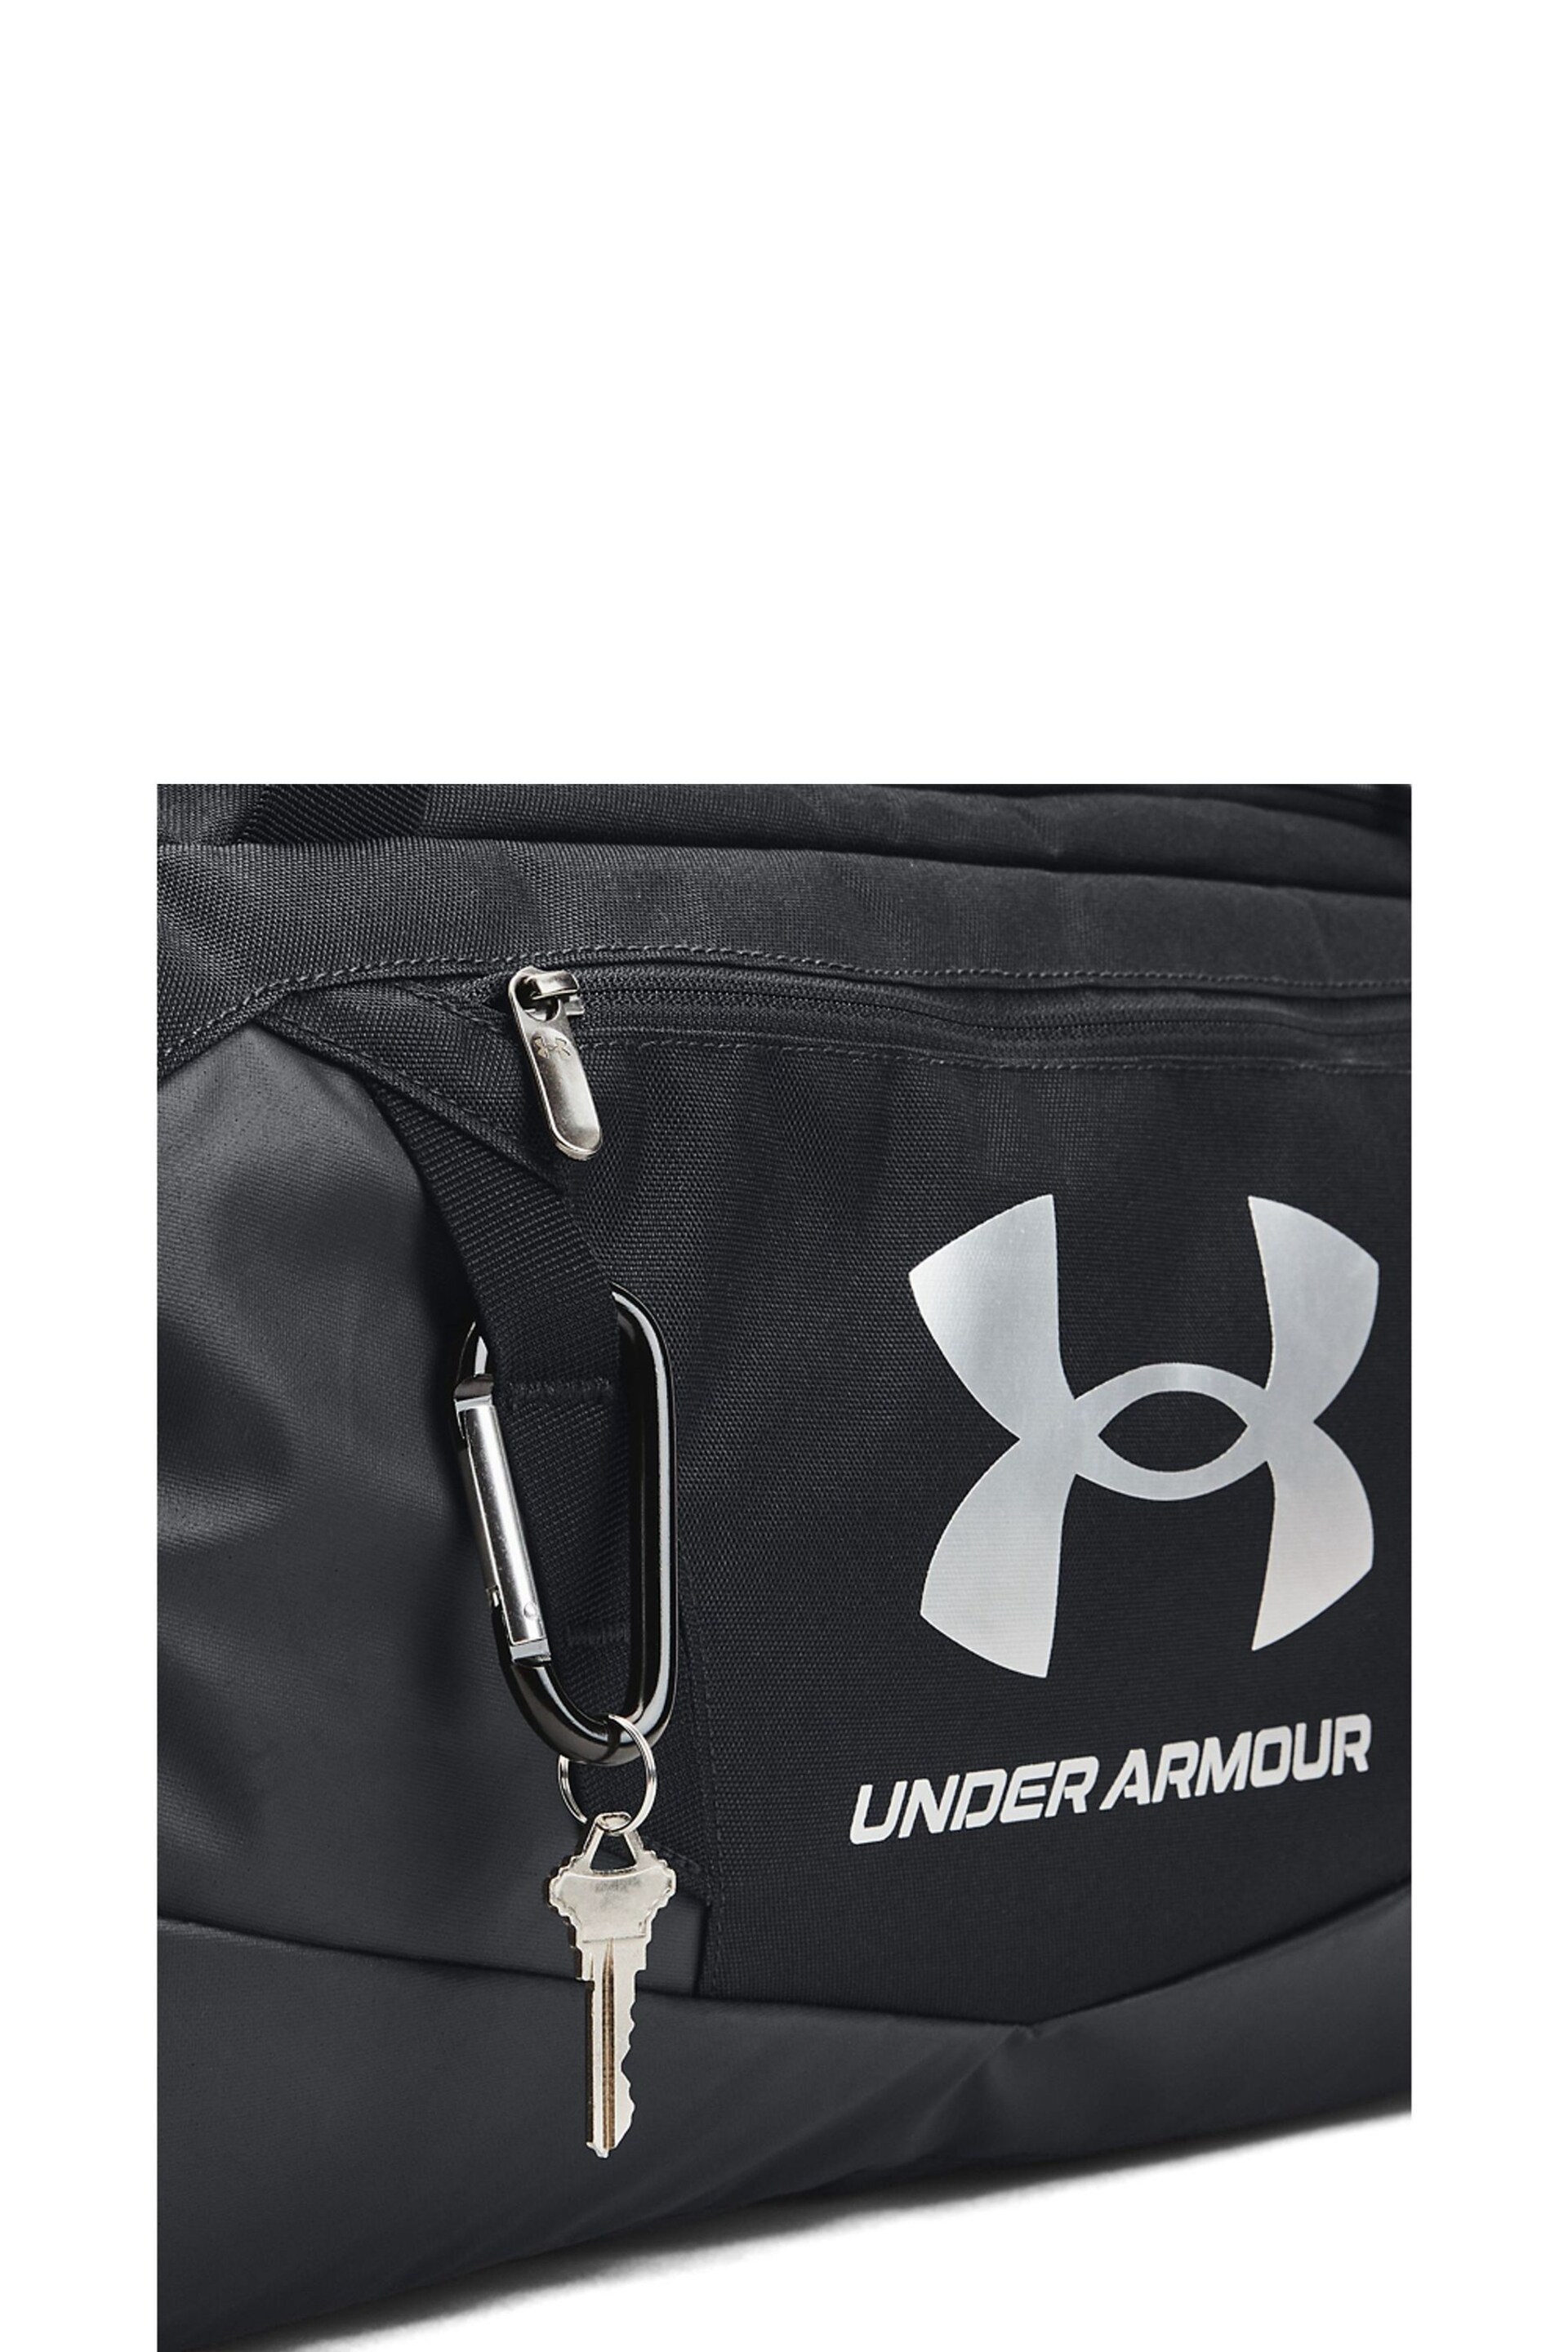 Under Armour Black Undeniable 5.0 Small Duffle Bag - Image 6 of 8